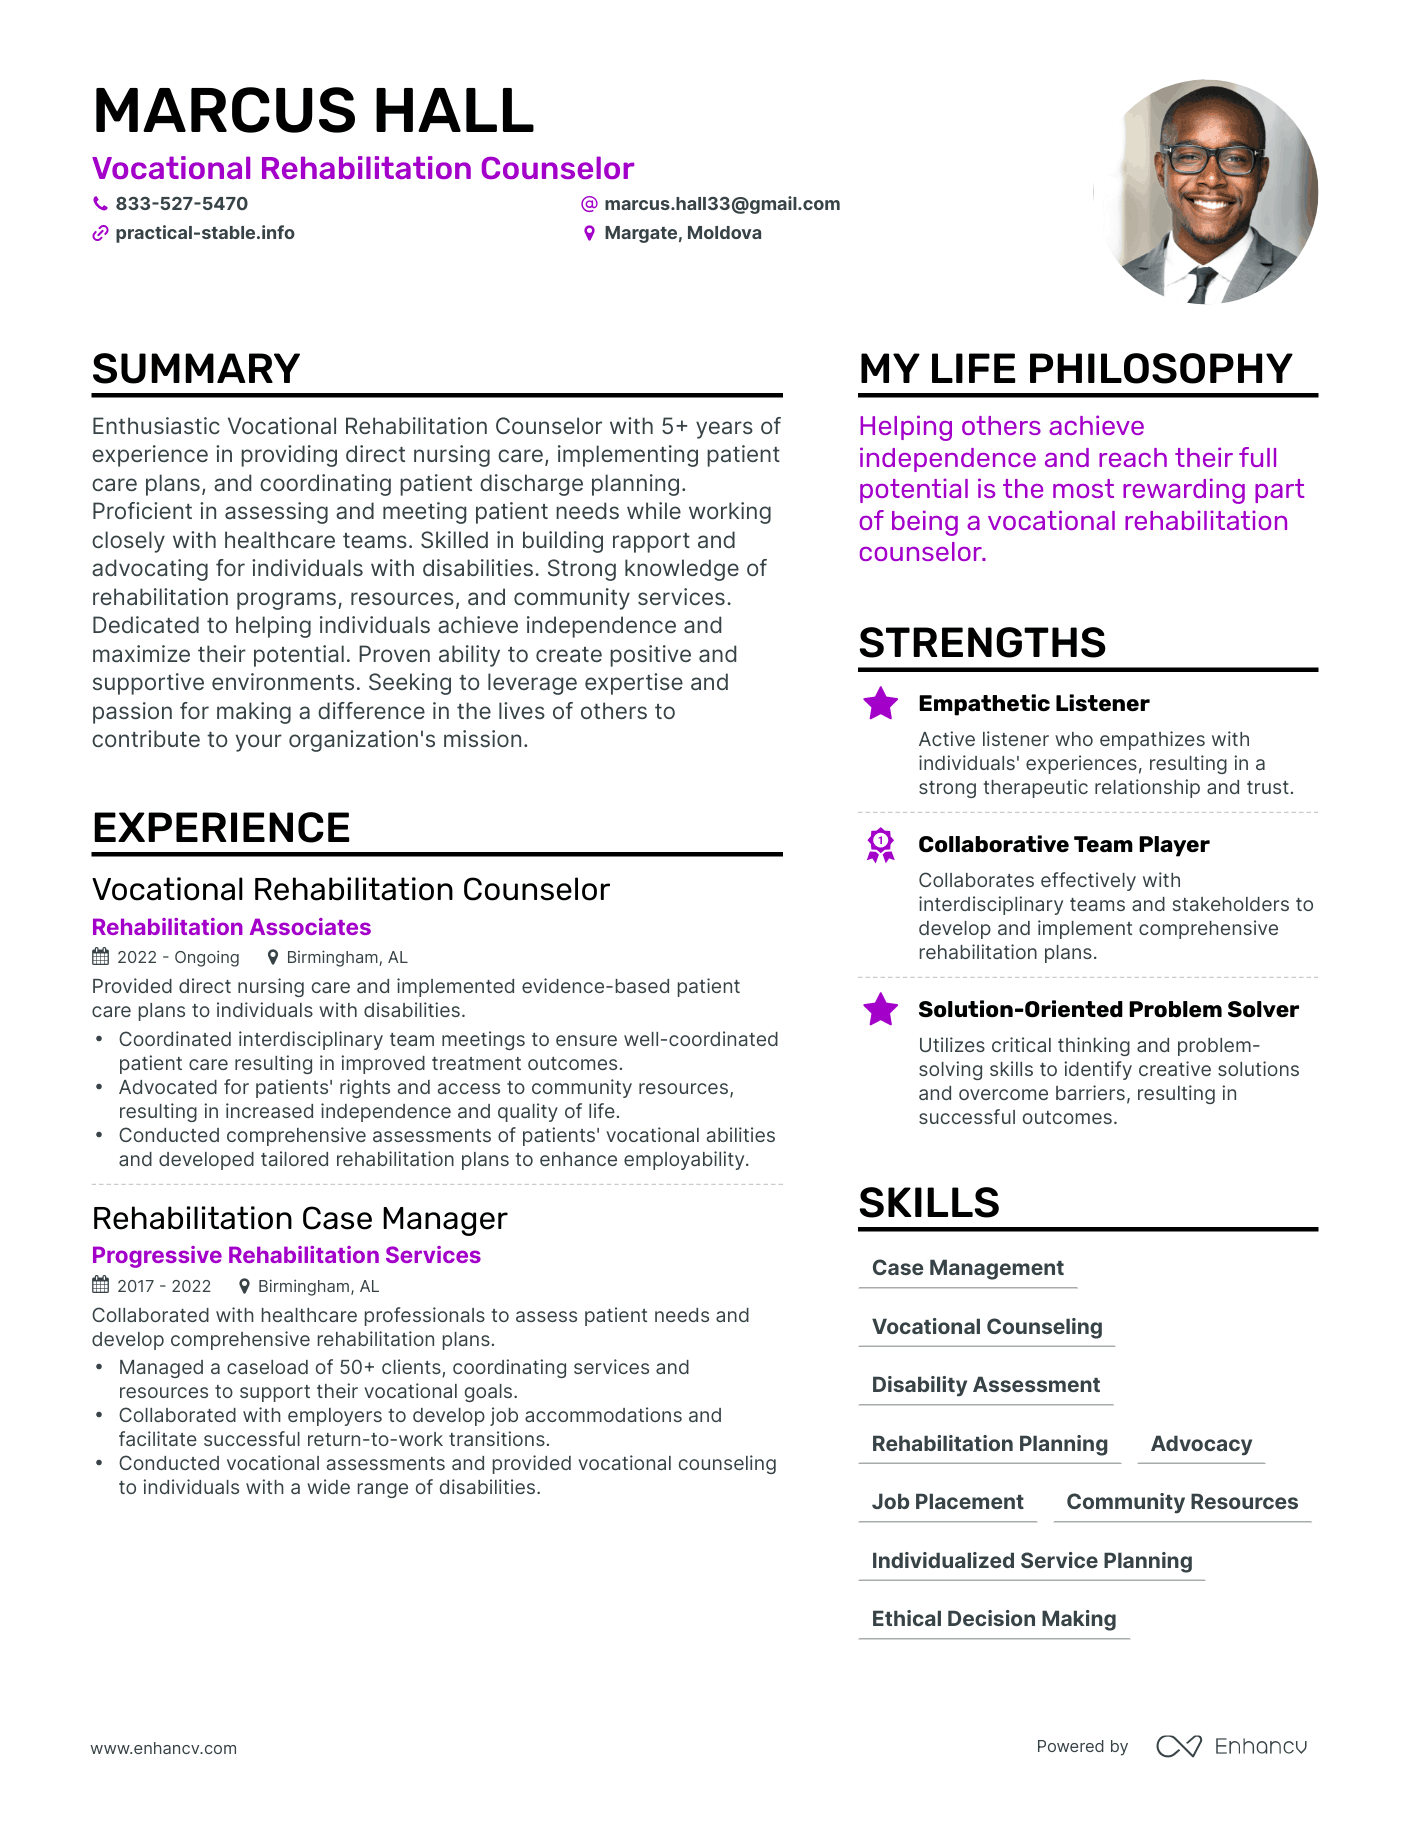 Vocational Rehabilitation Counselor resume example